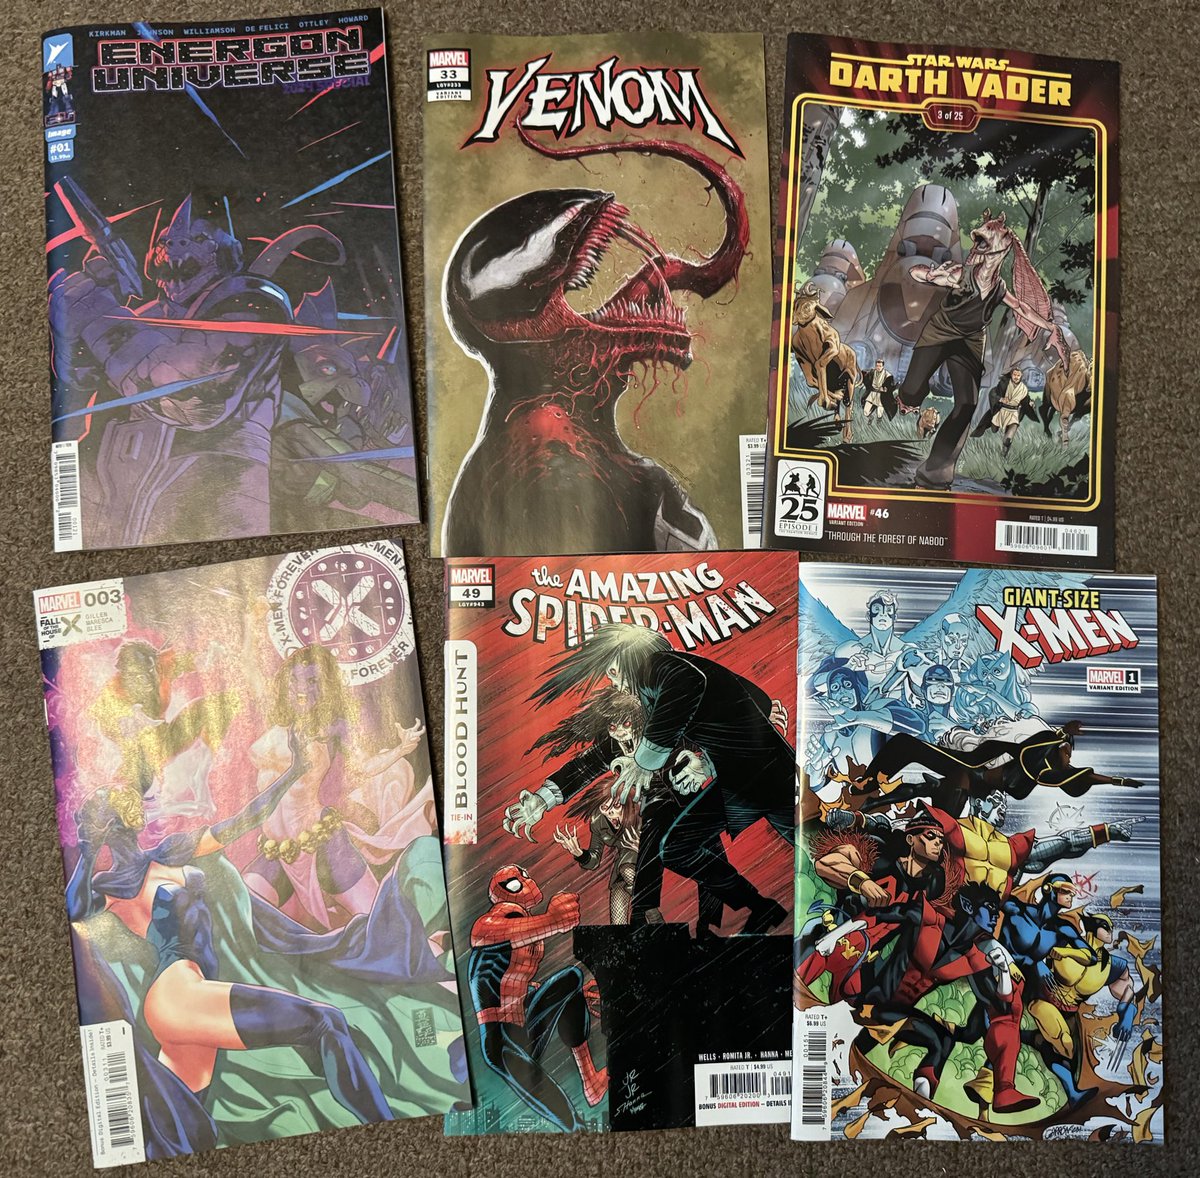 Pickups from #NewComicbookDay no idea why I’m still even buying Venom,  this story has been so bad for 33 issues now